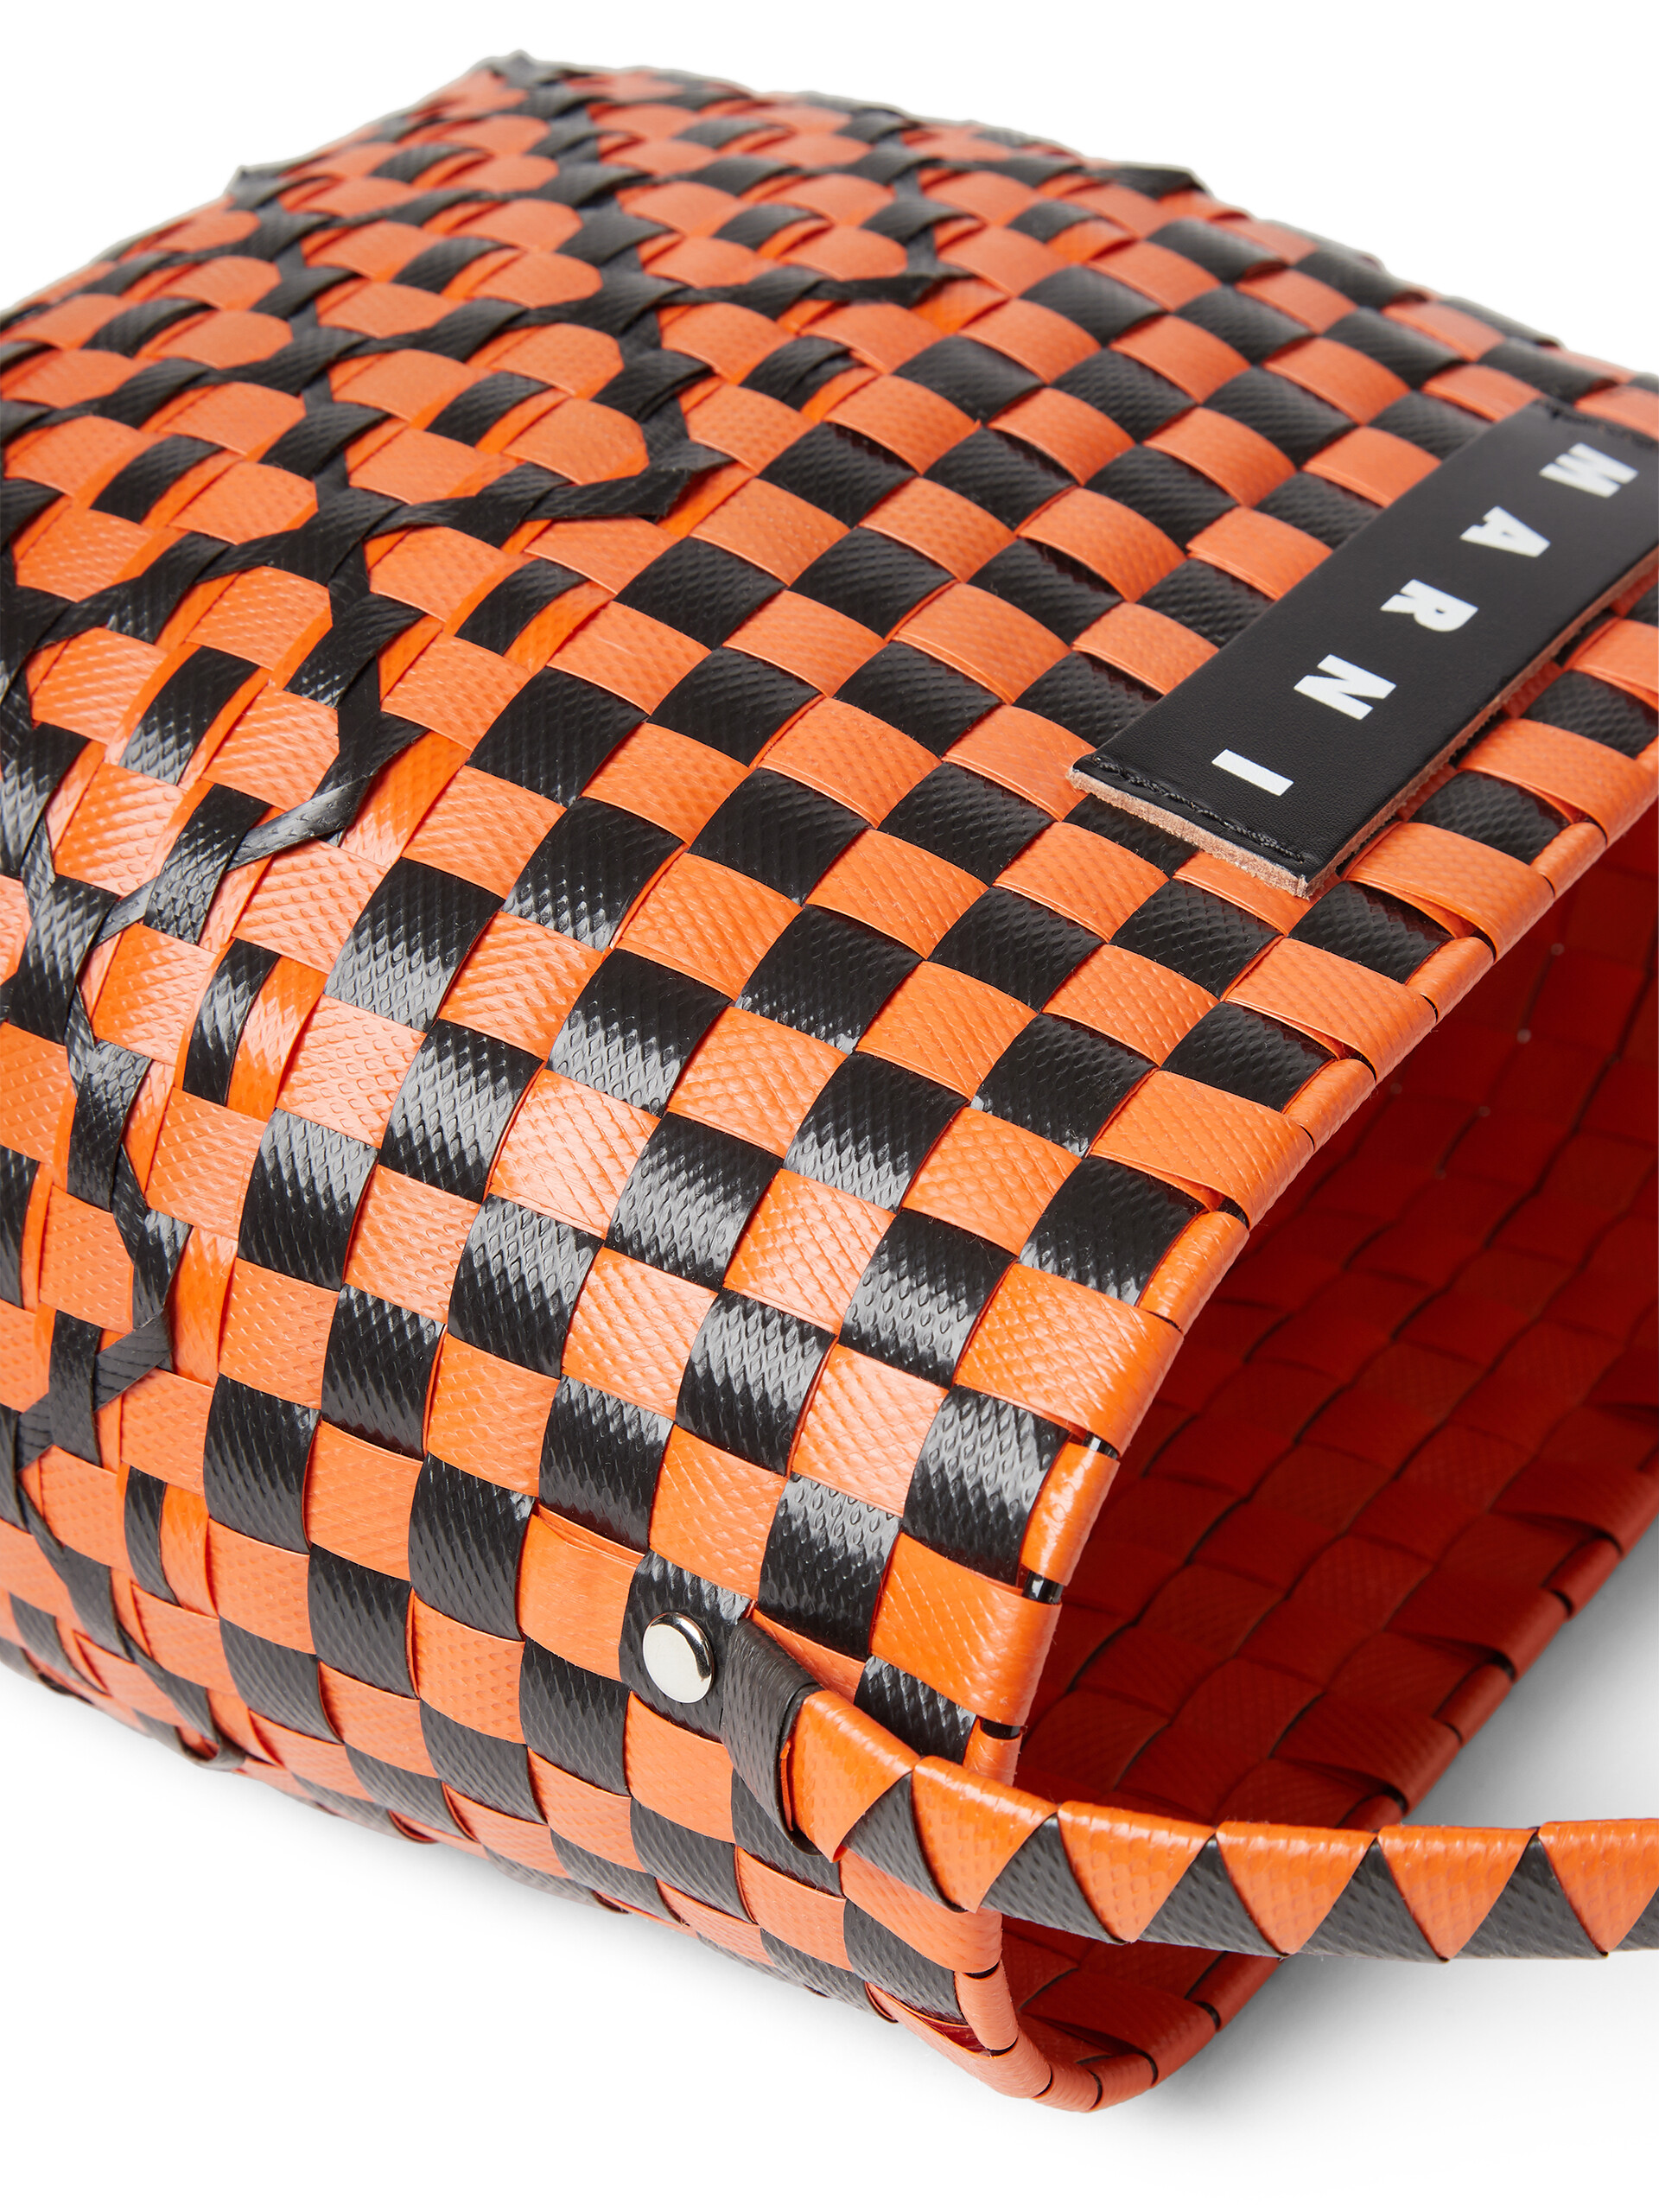 MARNI MARKET OVAL BASKET bag in orange and black woven material - Bags - Image 4